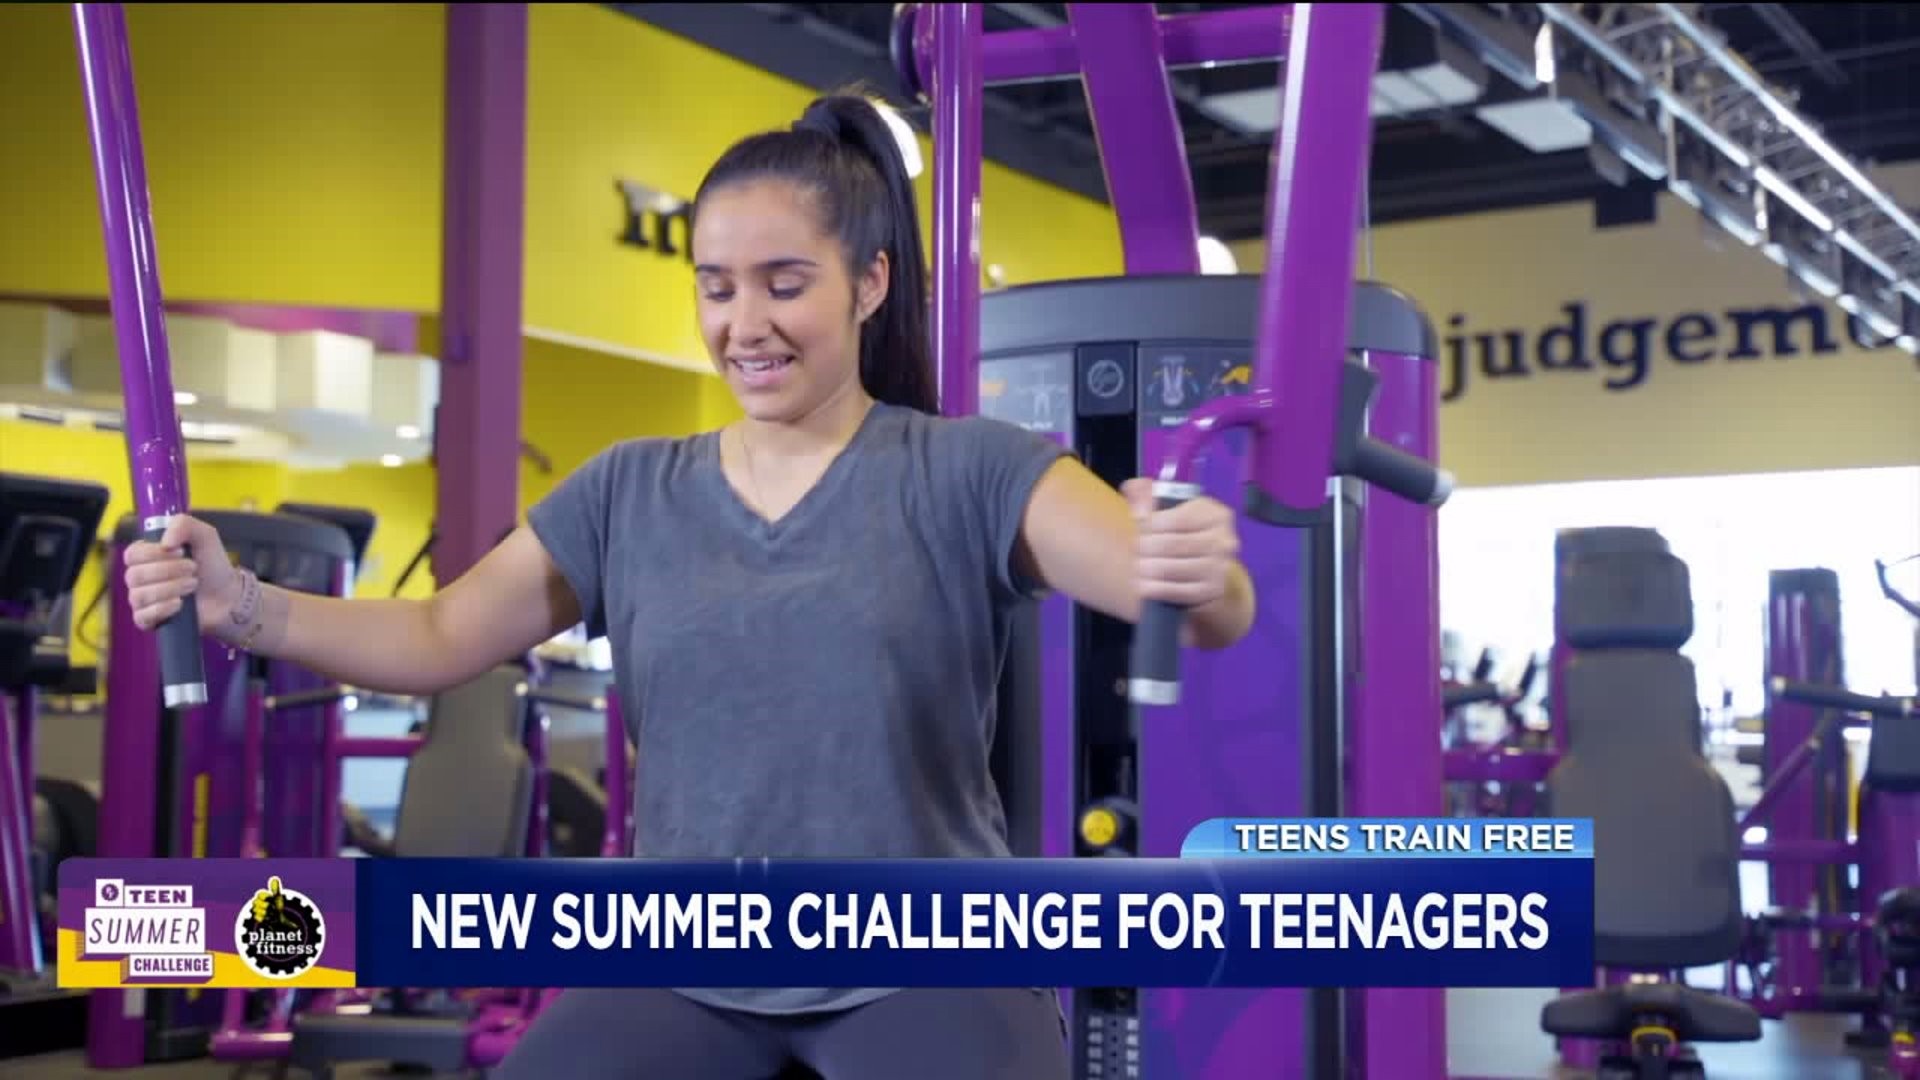 Teens Train Free Fitness Launches New Summer Program